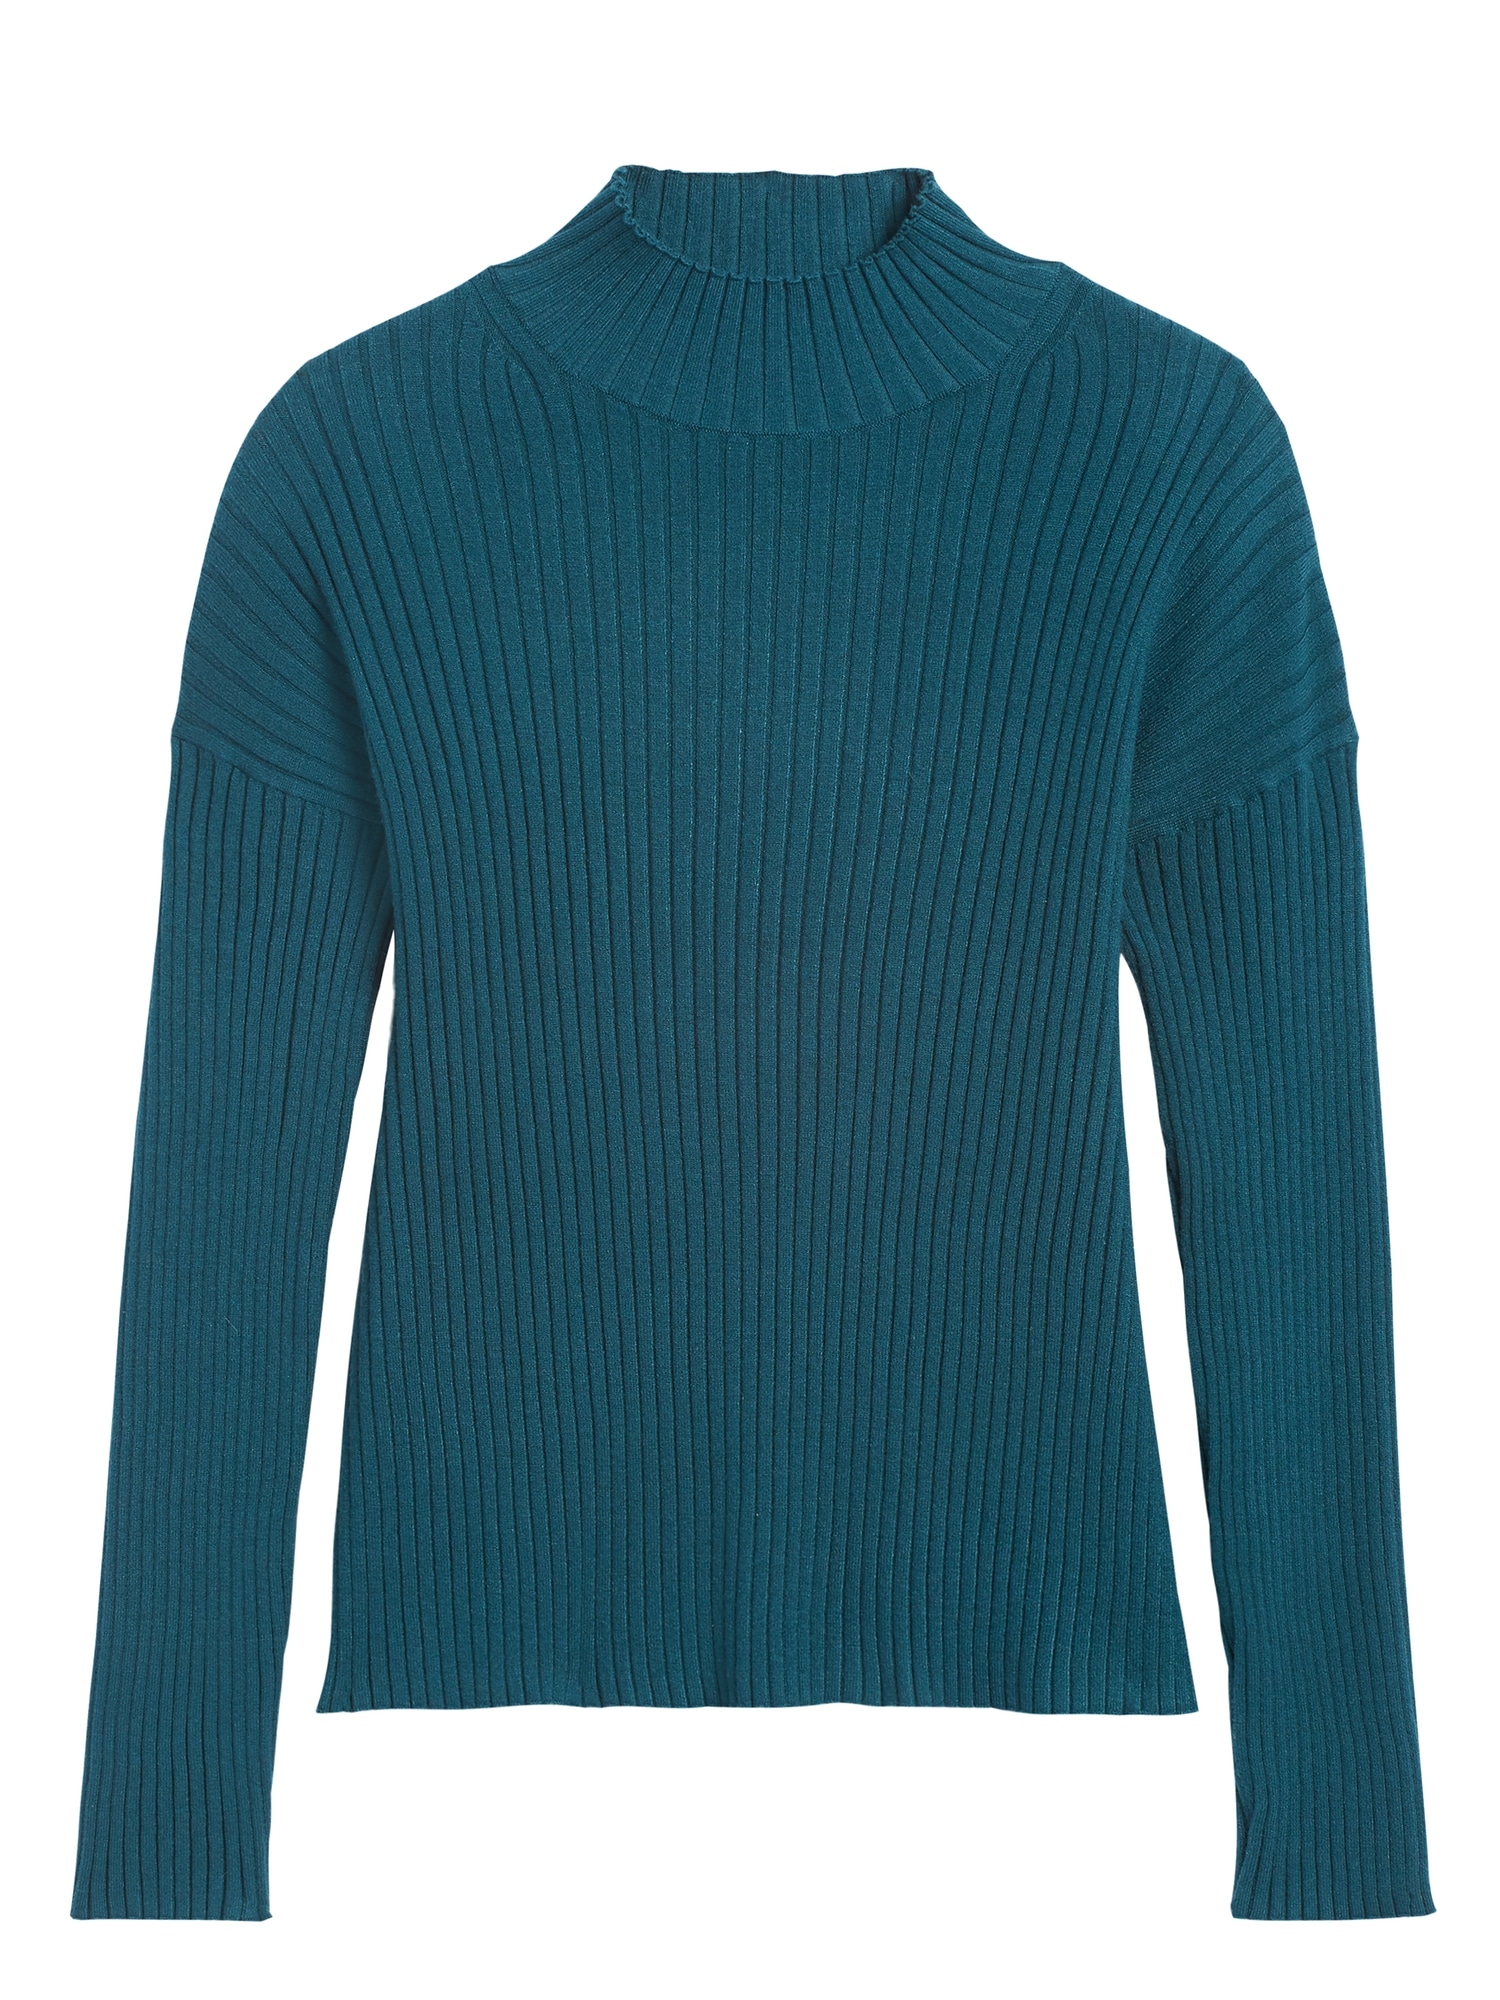 Ribbed Turtleneck Sweater Top